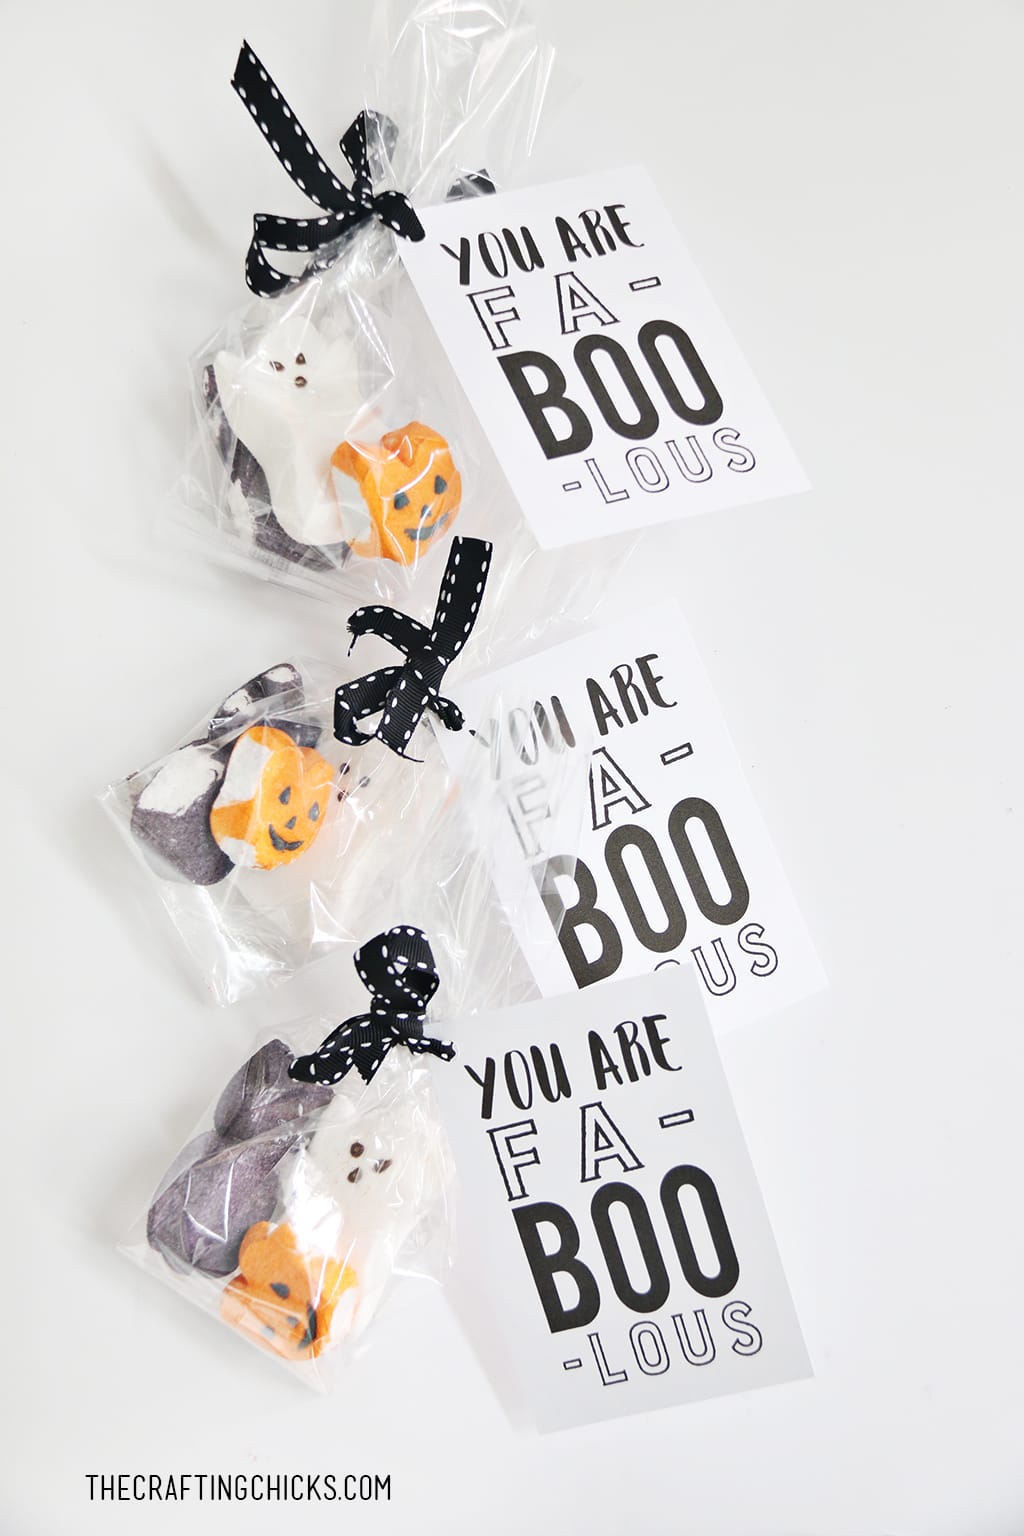 Fa "BOO" Lous Halloween Treat Tag on bags filled with Peeps Halloween candy.